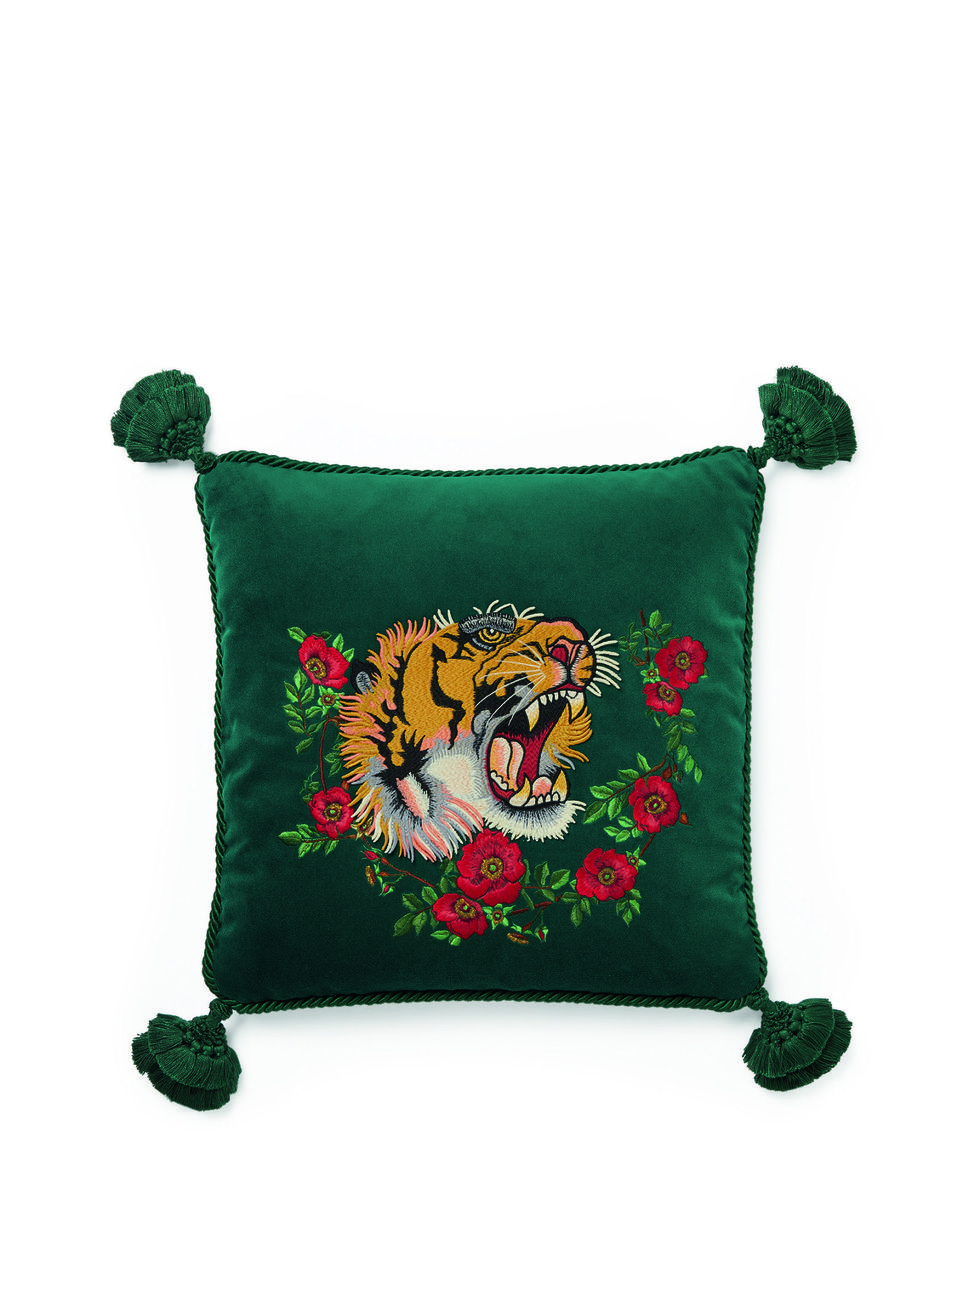 Green, Cushion, Pillow, Furniture, Font, Throw pillow, Textile, Fictional character, Home accessories, Embroidery, 